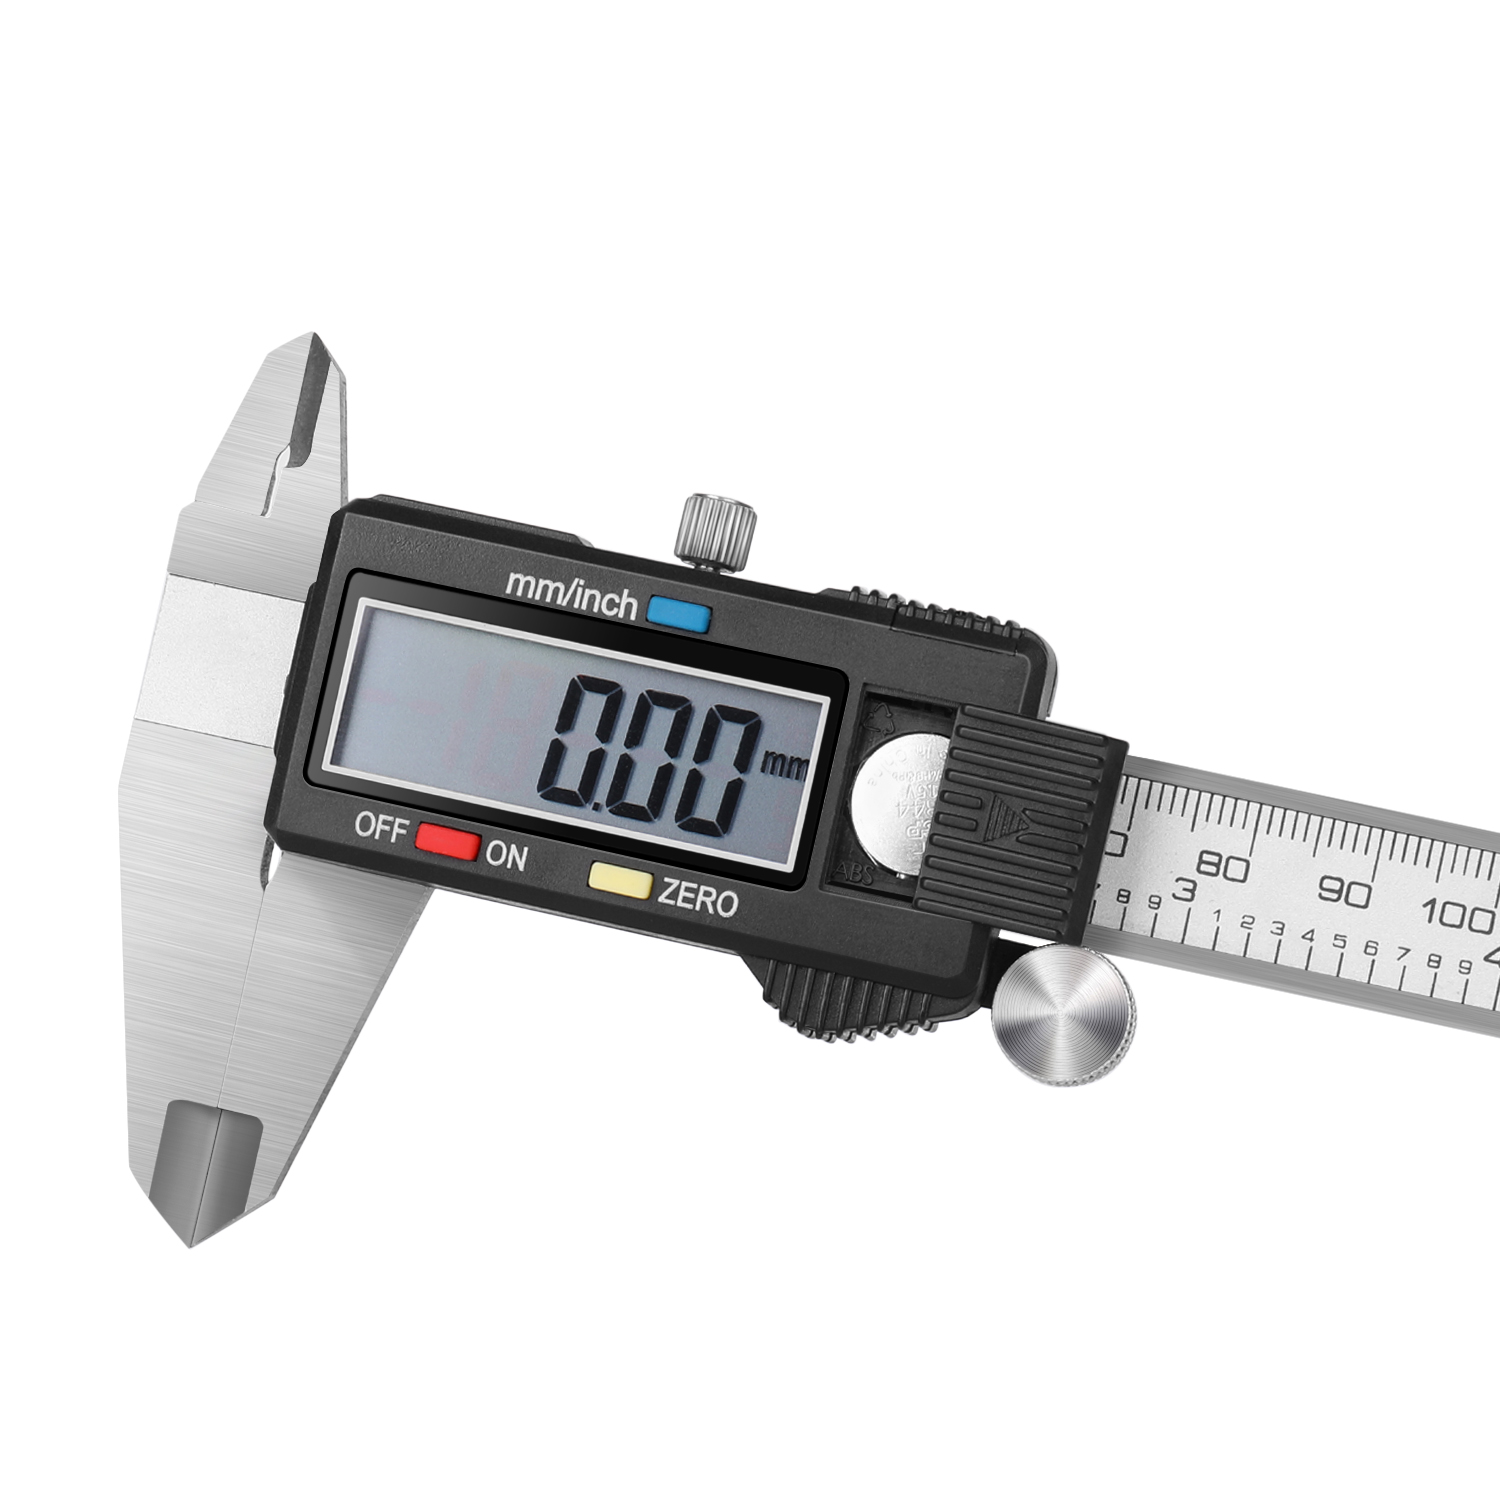 Stainless Steel Durability - Constructed with hardened stainless steel, this digital imperial & metric caliper ensures precise measurements in any environment.